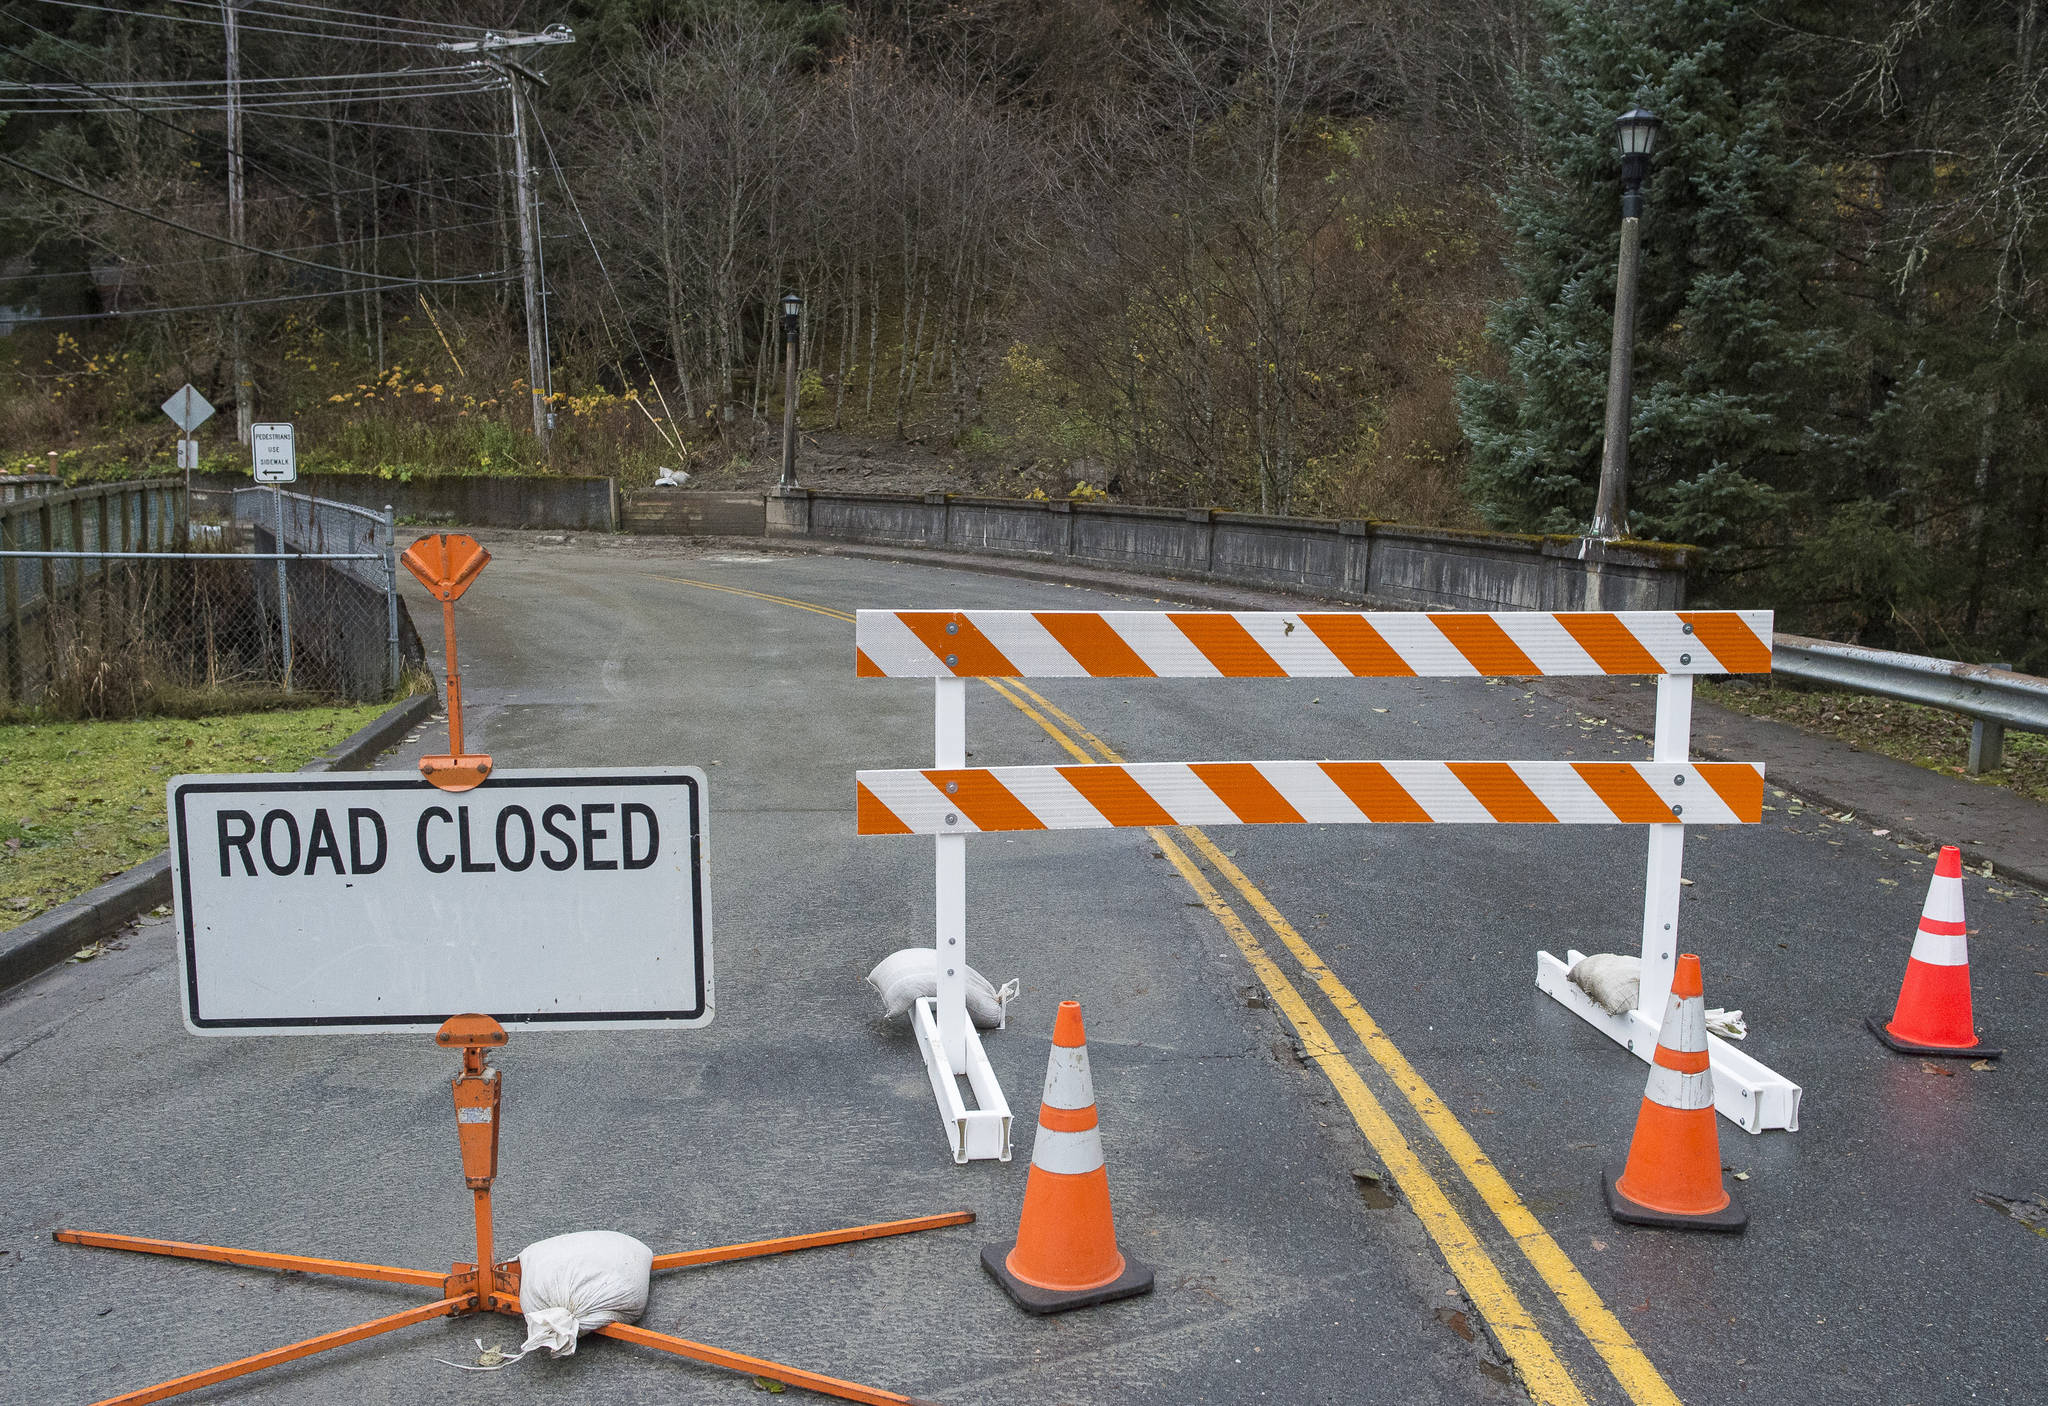 The Calhoun Avenue Bridge of Gold Creek remains closed on Monday, Oct. 30, 2017, so state inspectors can check for damage after Friday’s storm. (Michael Penn | Juneau Empire)